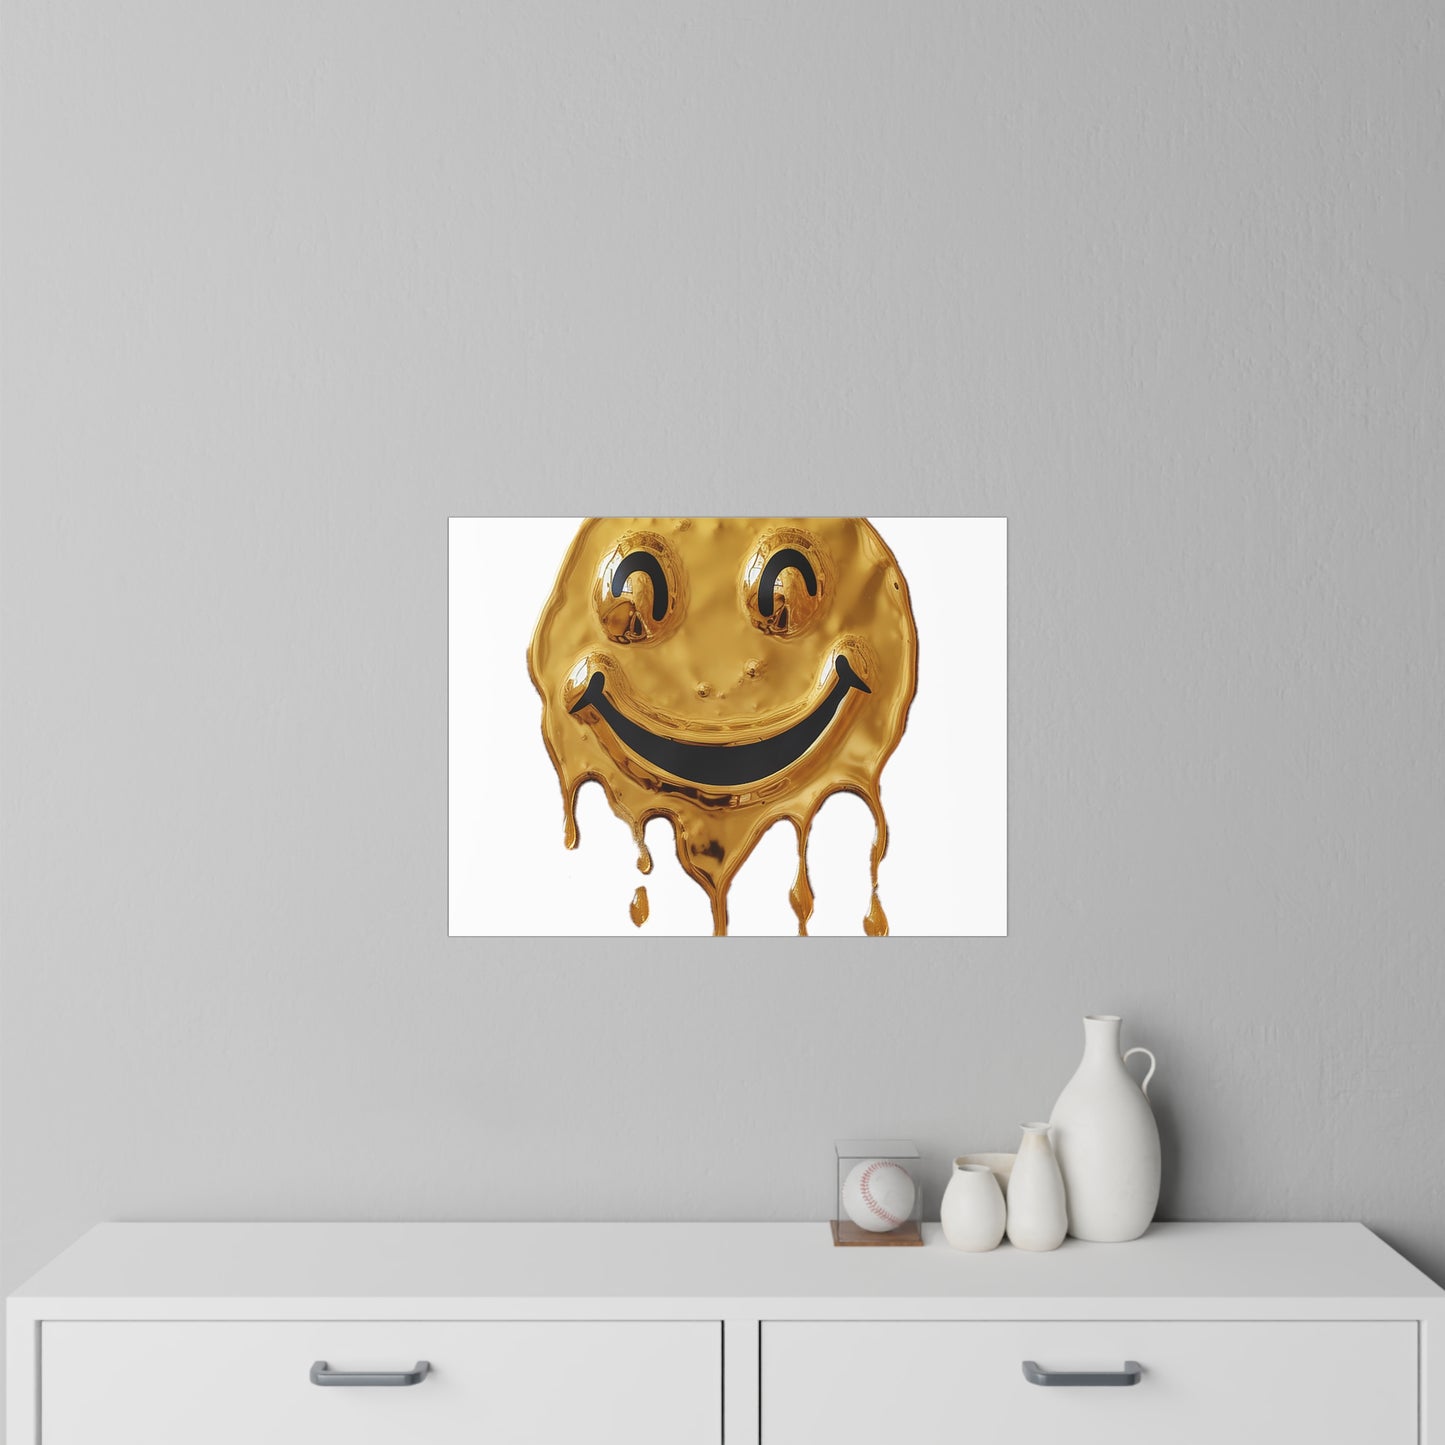 Dripping Gold Smiley Wall Decal